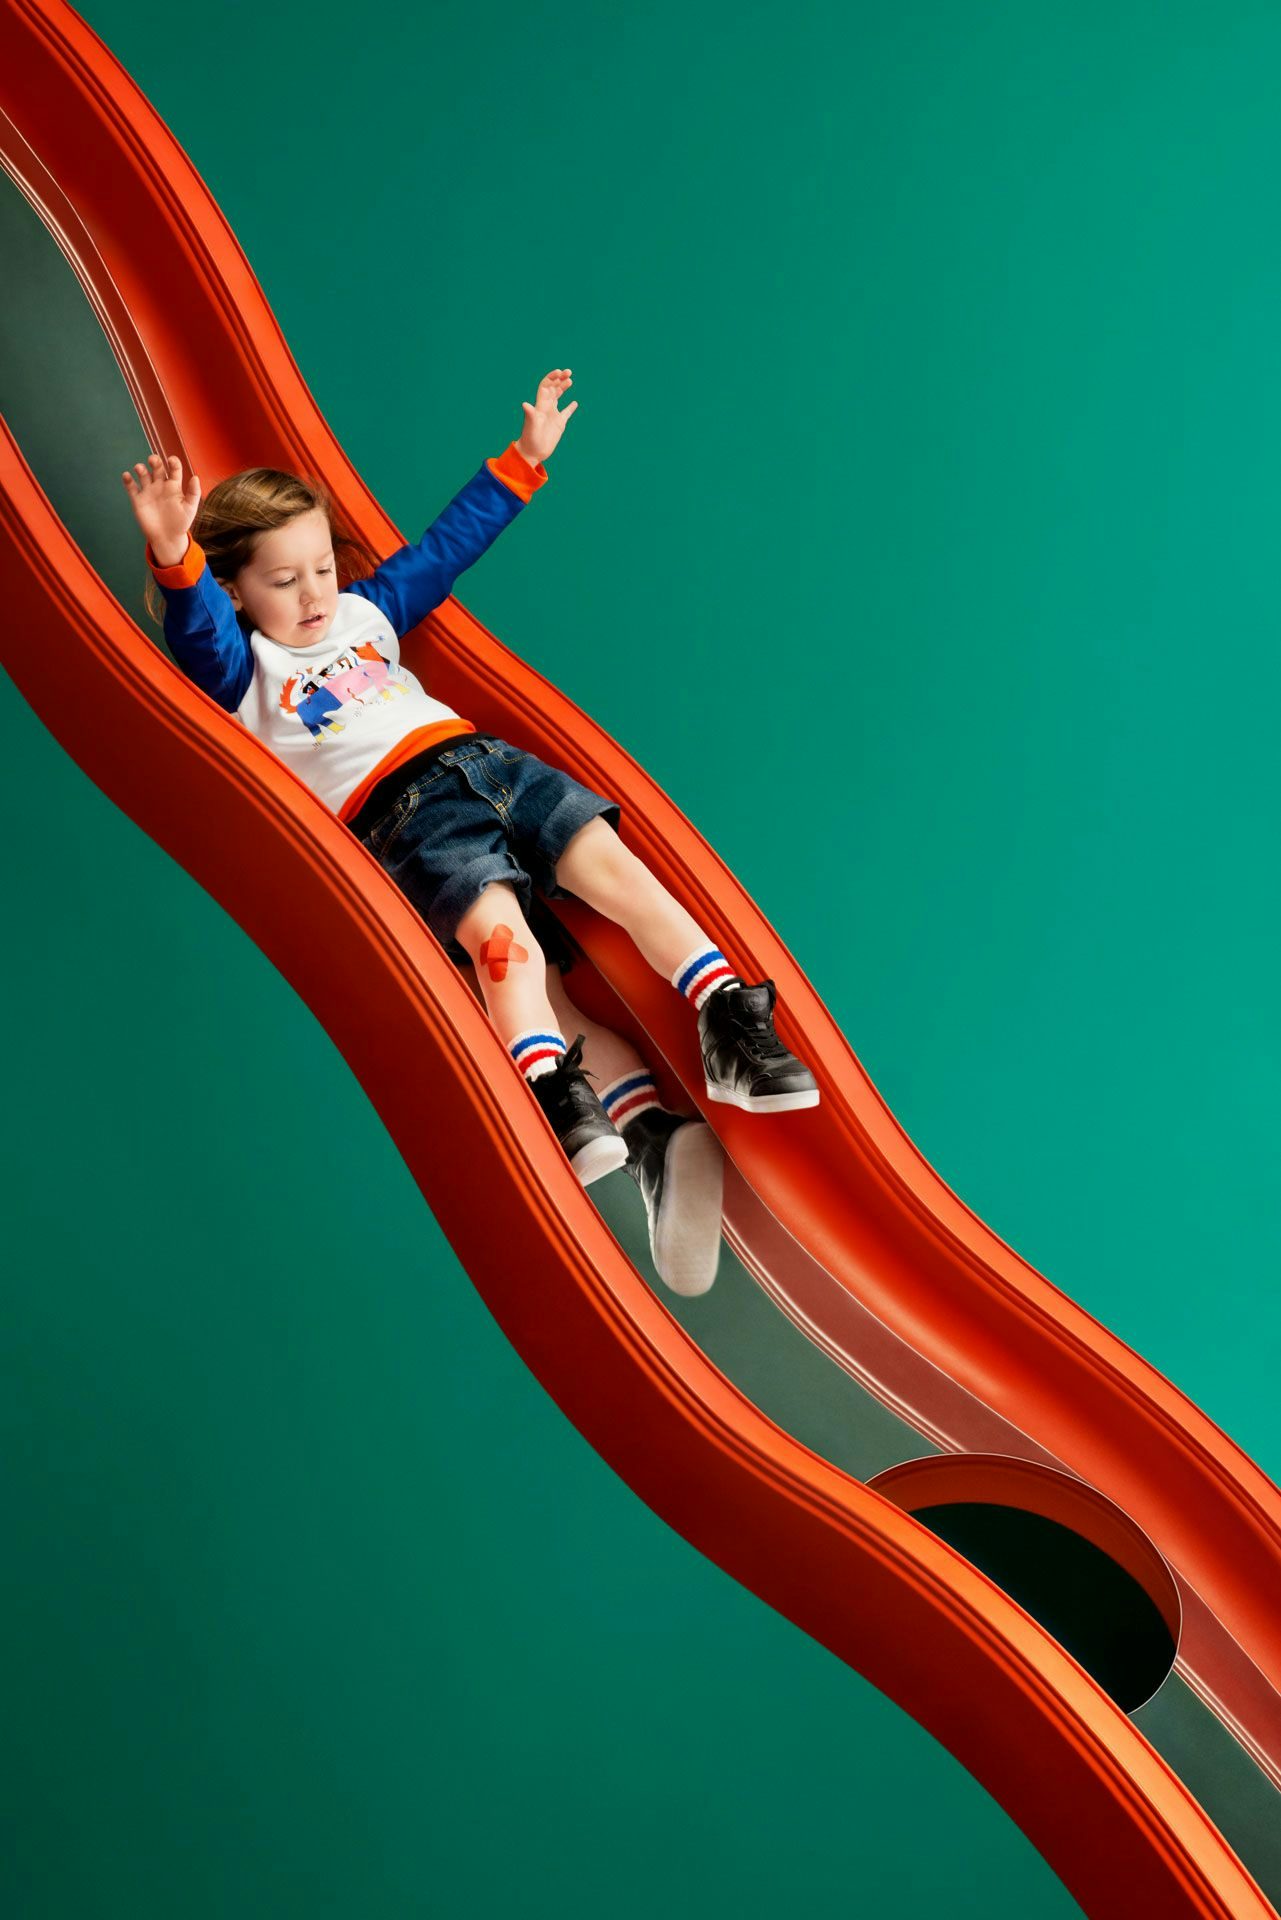 A child joyfully sliding down a vibrant red slide against a teal background.